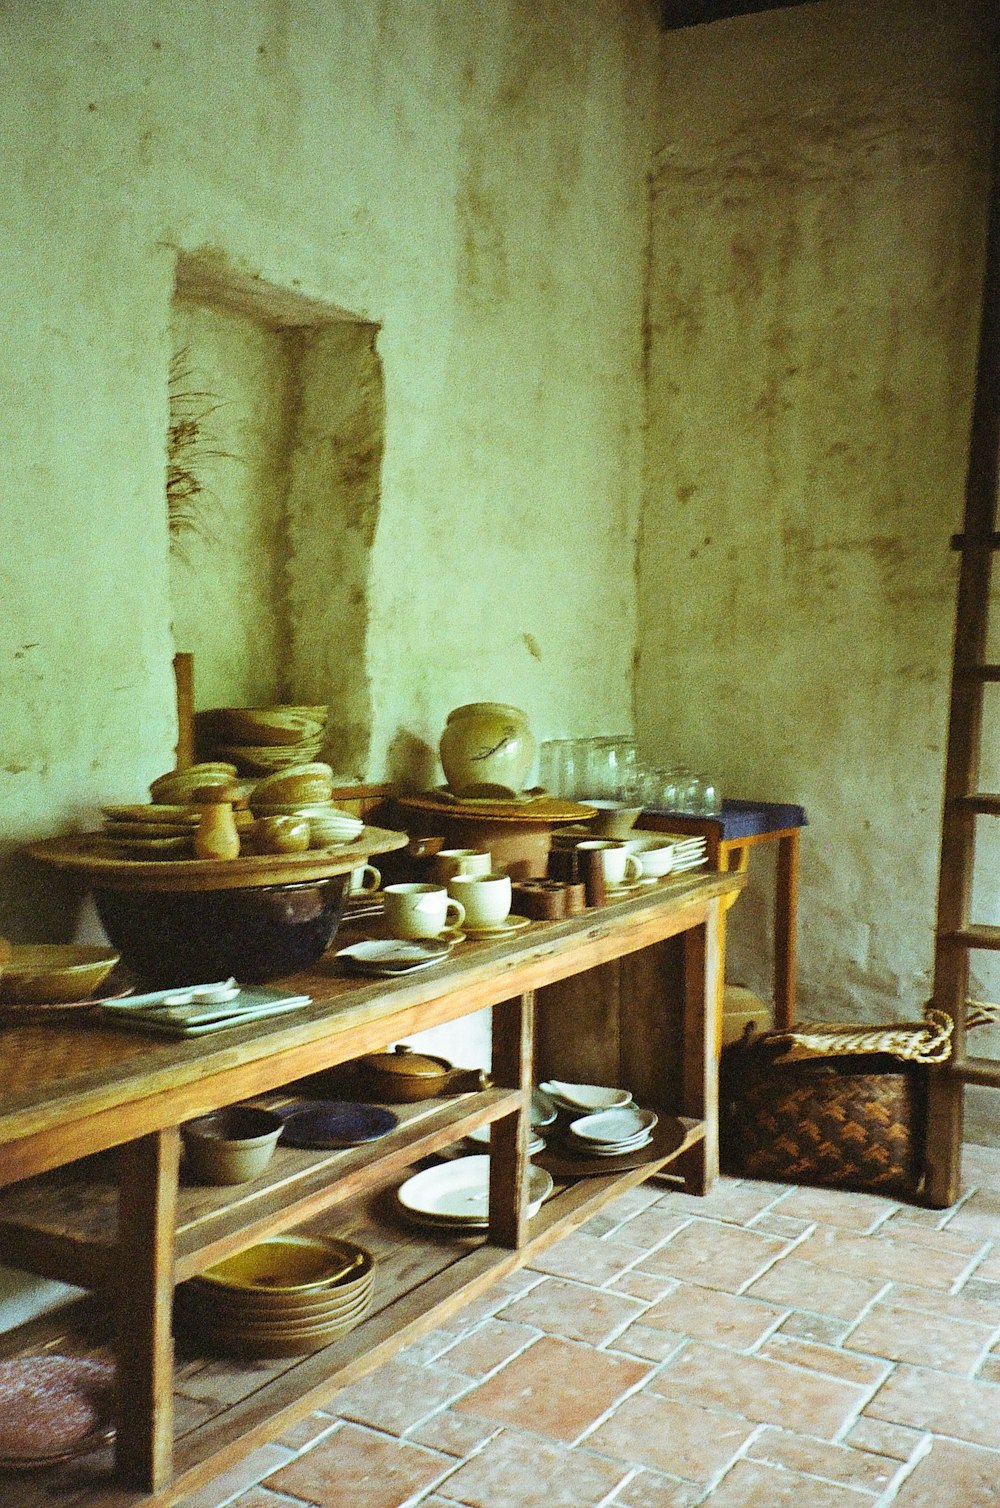 a wooden table topped with bowls and plates